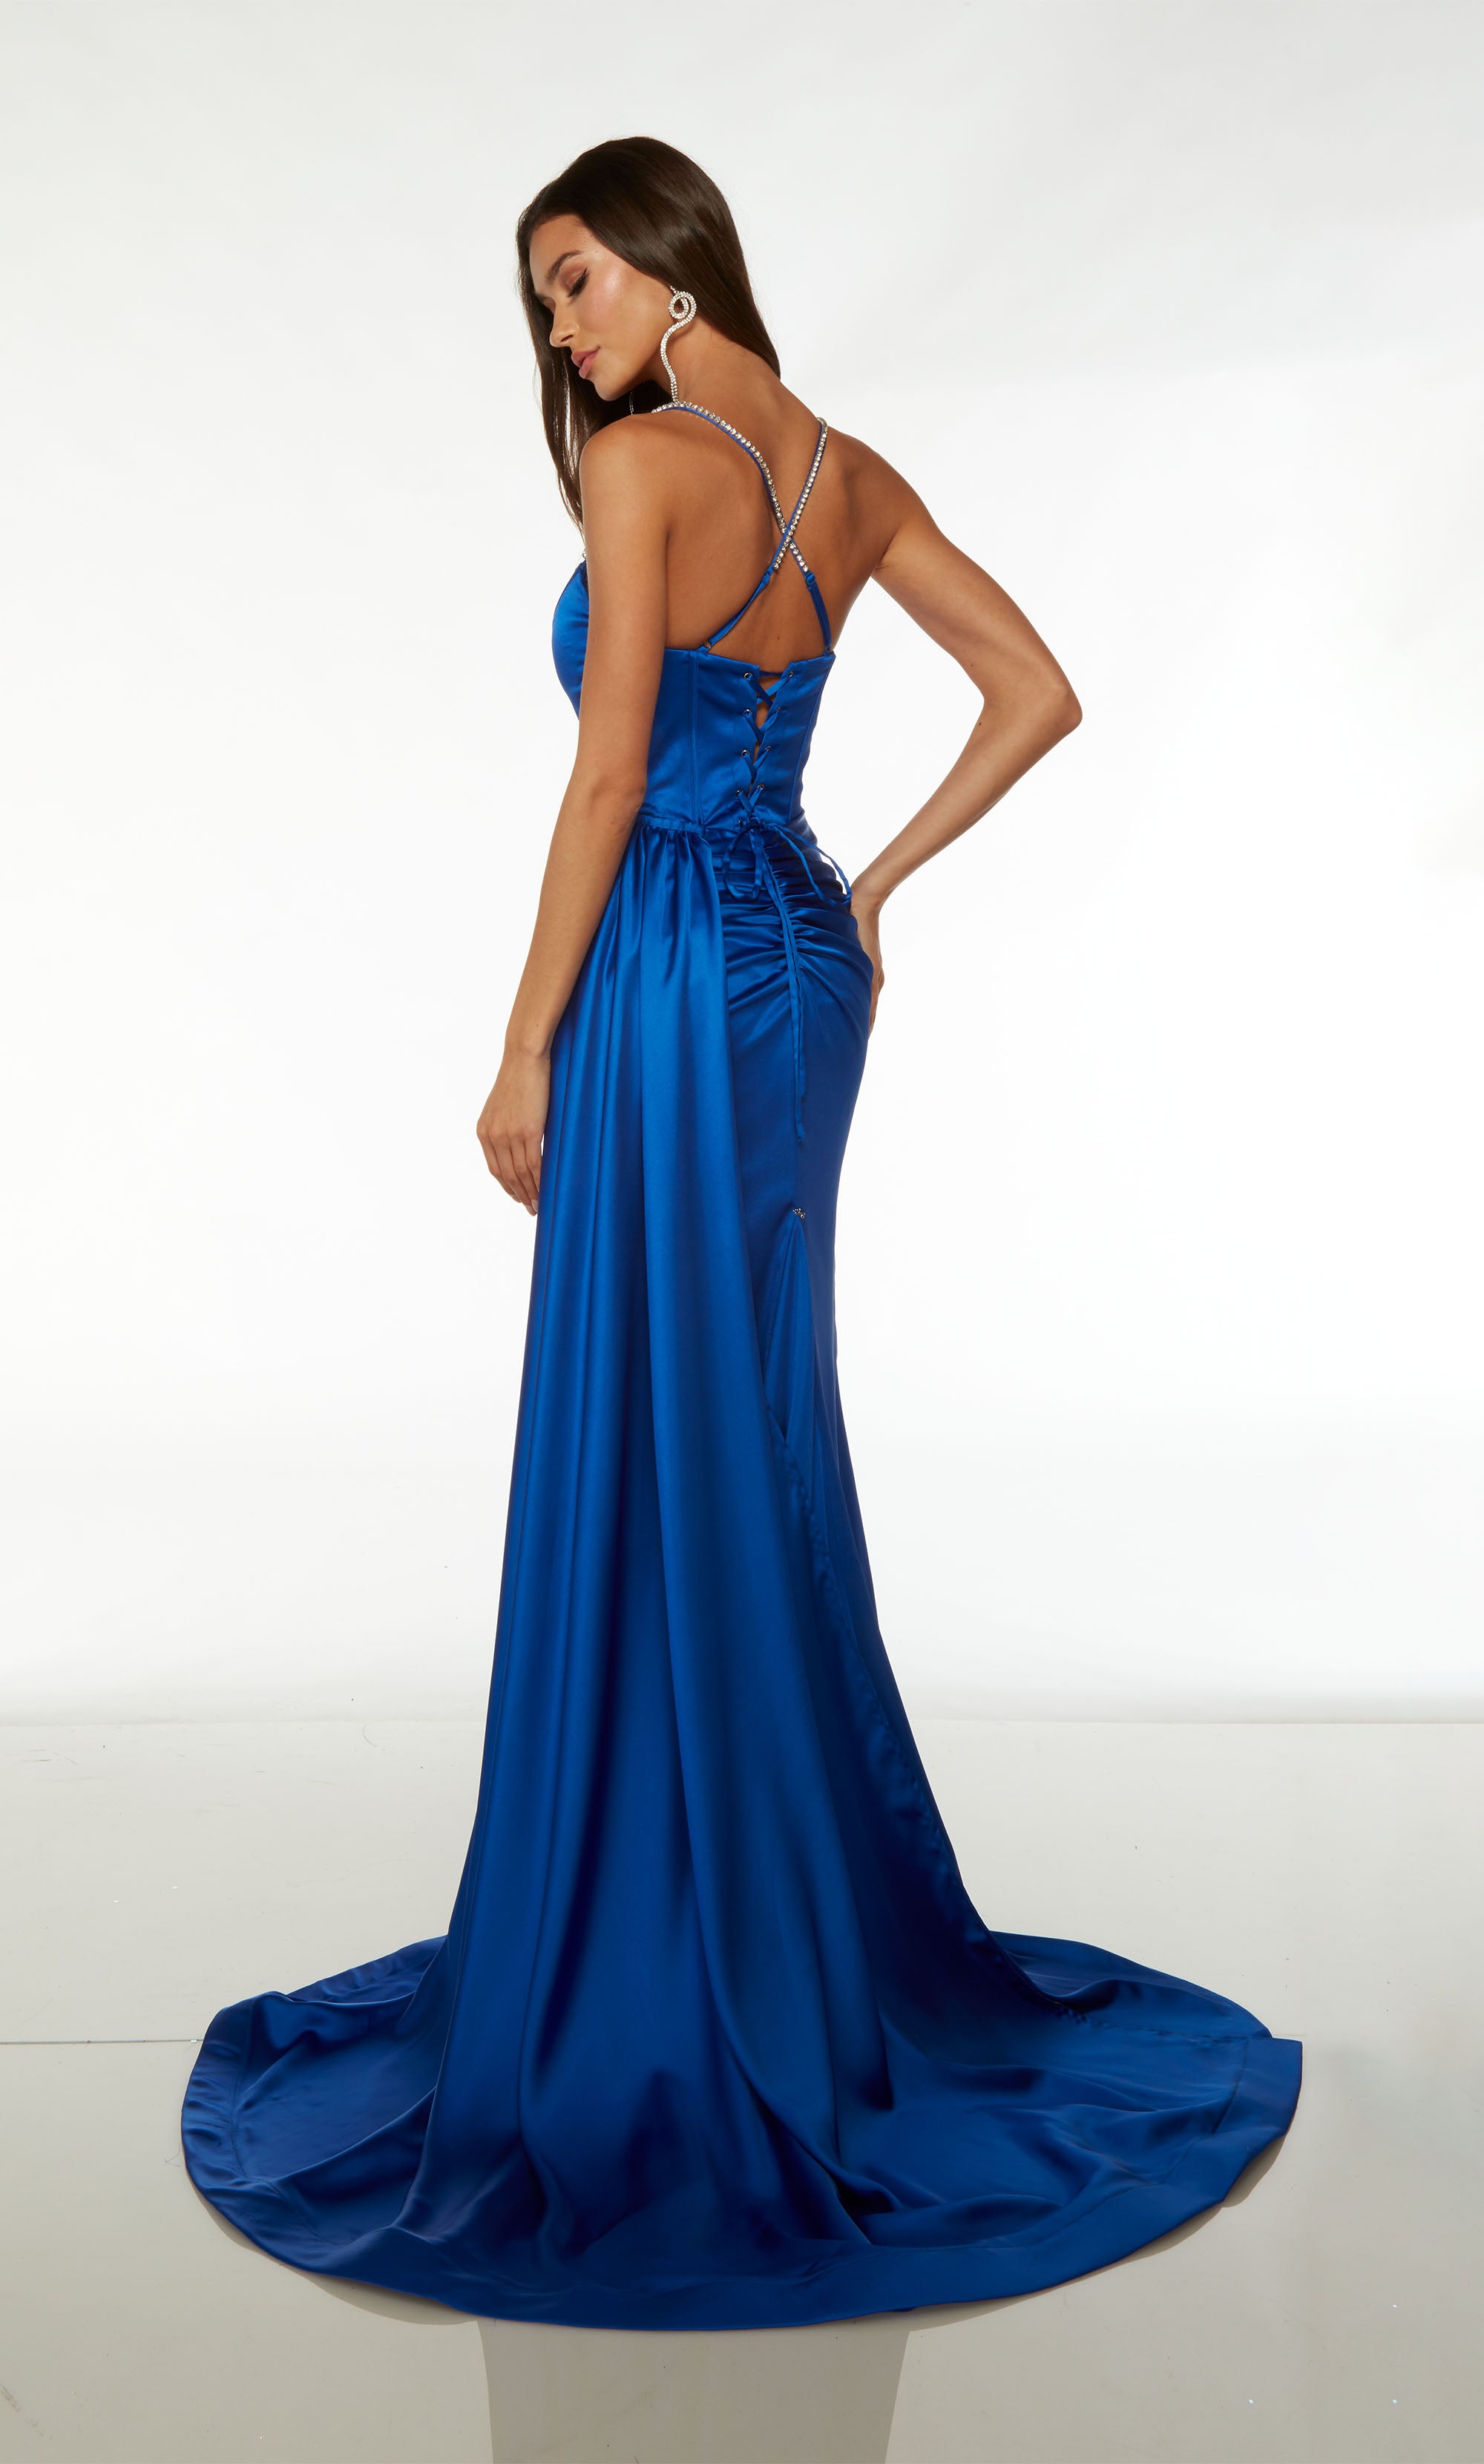 Blue satin corset prom dress with square neckline, gathered waist, high slit, jeweled straps, lace-up back, and detachable side train for added flair.